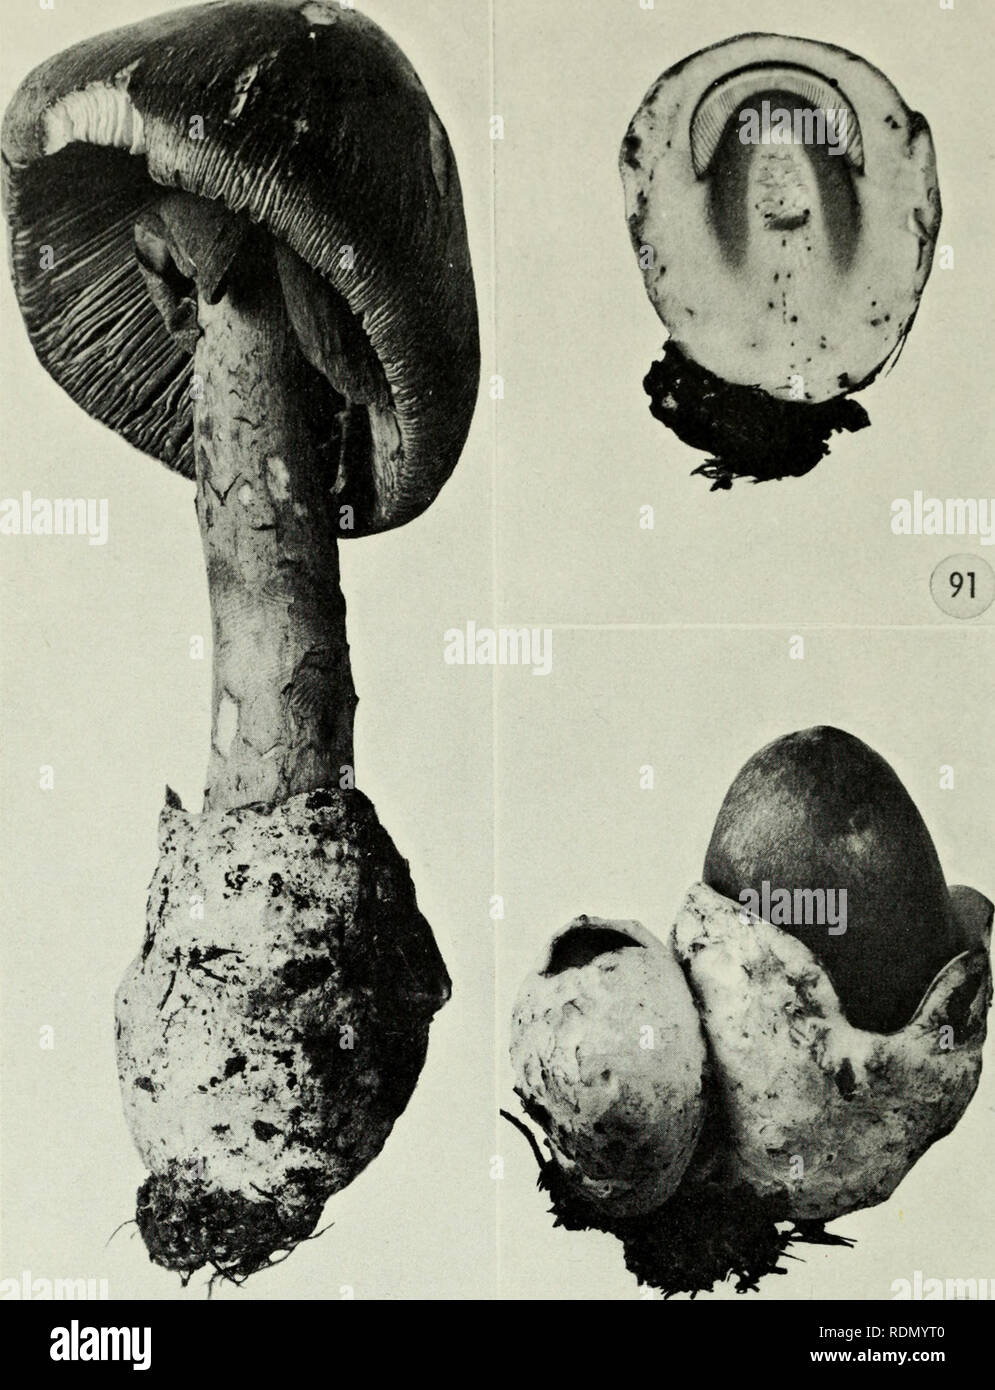 . Edible and poisonous mushrooms of Canada. Mushrooms, Poisonous; Edible mushrooms. I I 90 V 92 Figures 90-92, Amanita caesarea. 90, mature plant, note loose membranous volva; 91, section of young plant before volva has ruptured showing outline of young fruiting body within the volva; 92, young plants showing ruptured volva with young fruiting body emerging. 93. Russula densifolia. 95. R. emetica. 97. R.jallax. 99. R. joetens. 101. R. lutea. Figures 93-102 94. R. densifolia. 96. R. emetica. 98. R.flava. 100. R.fragilis. 102. R. nigricans. 48. Please note that these images are extracted from sc Stock Photo